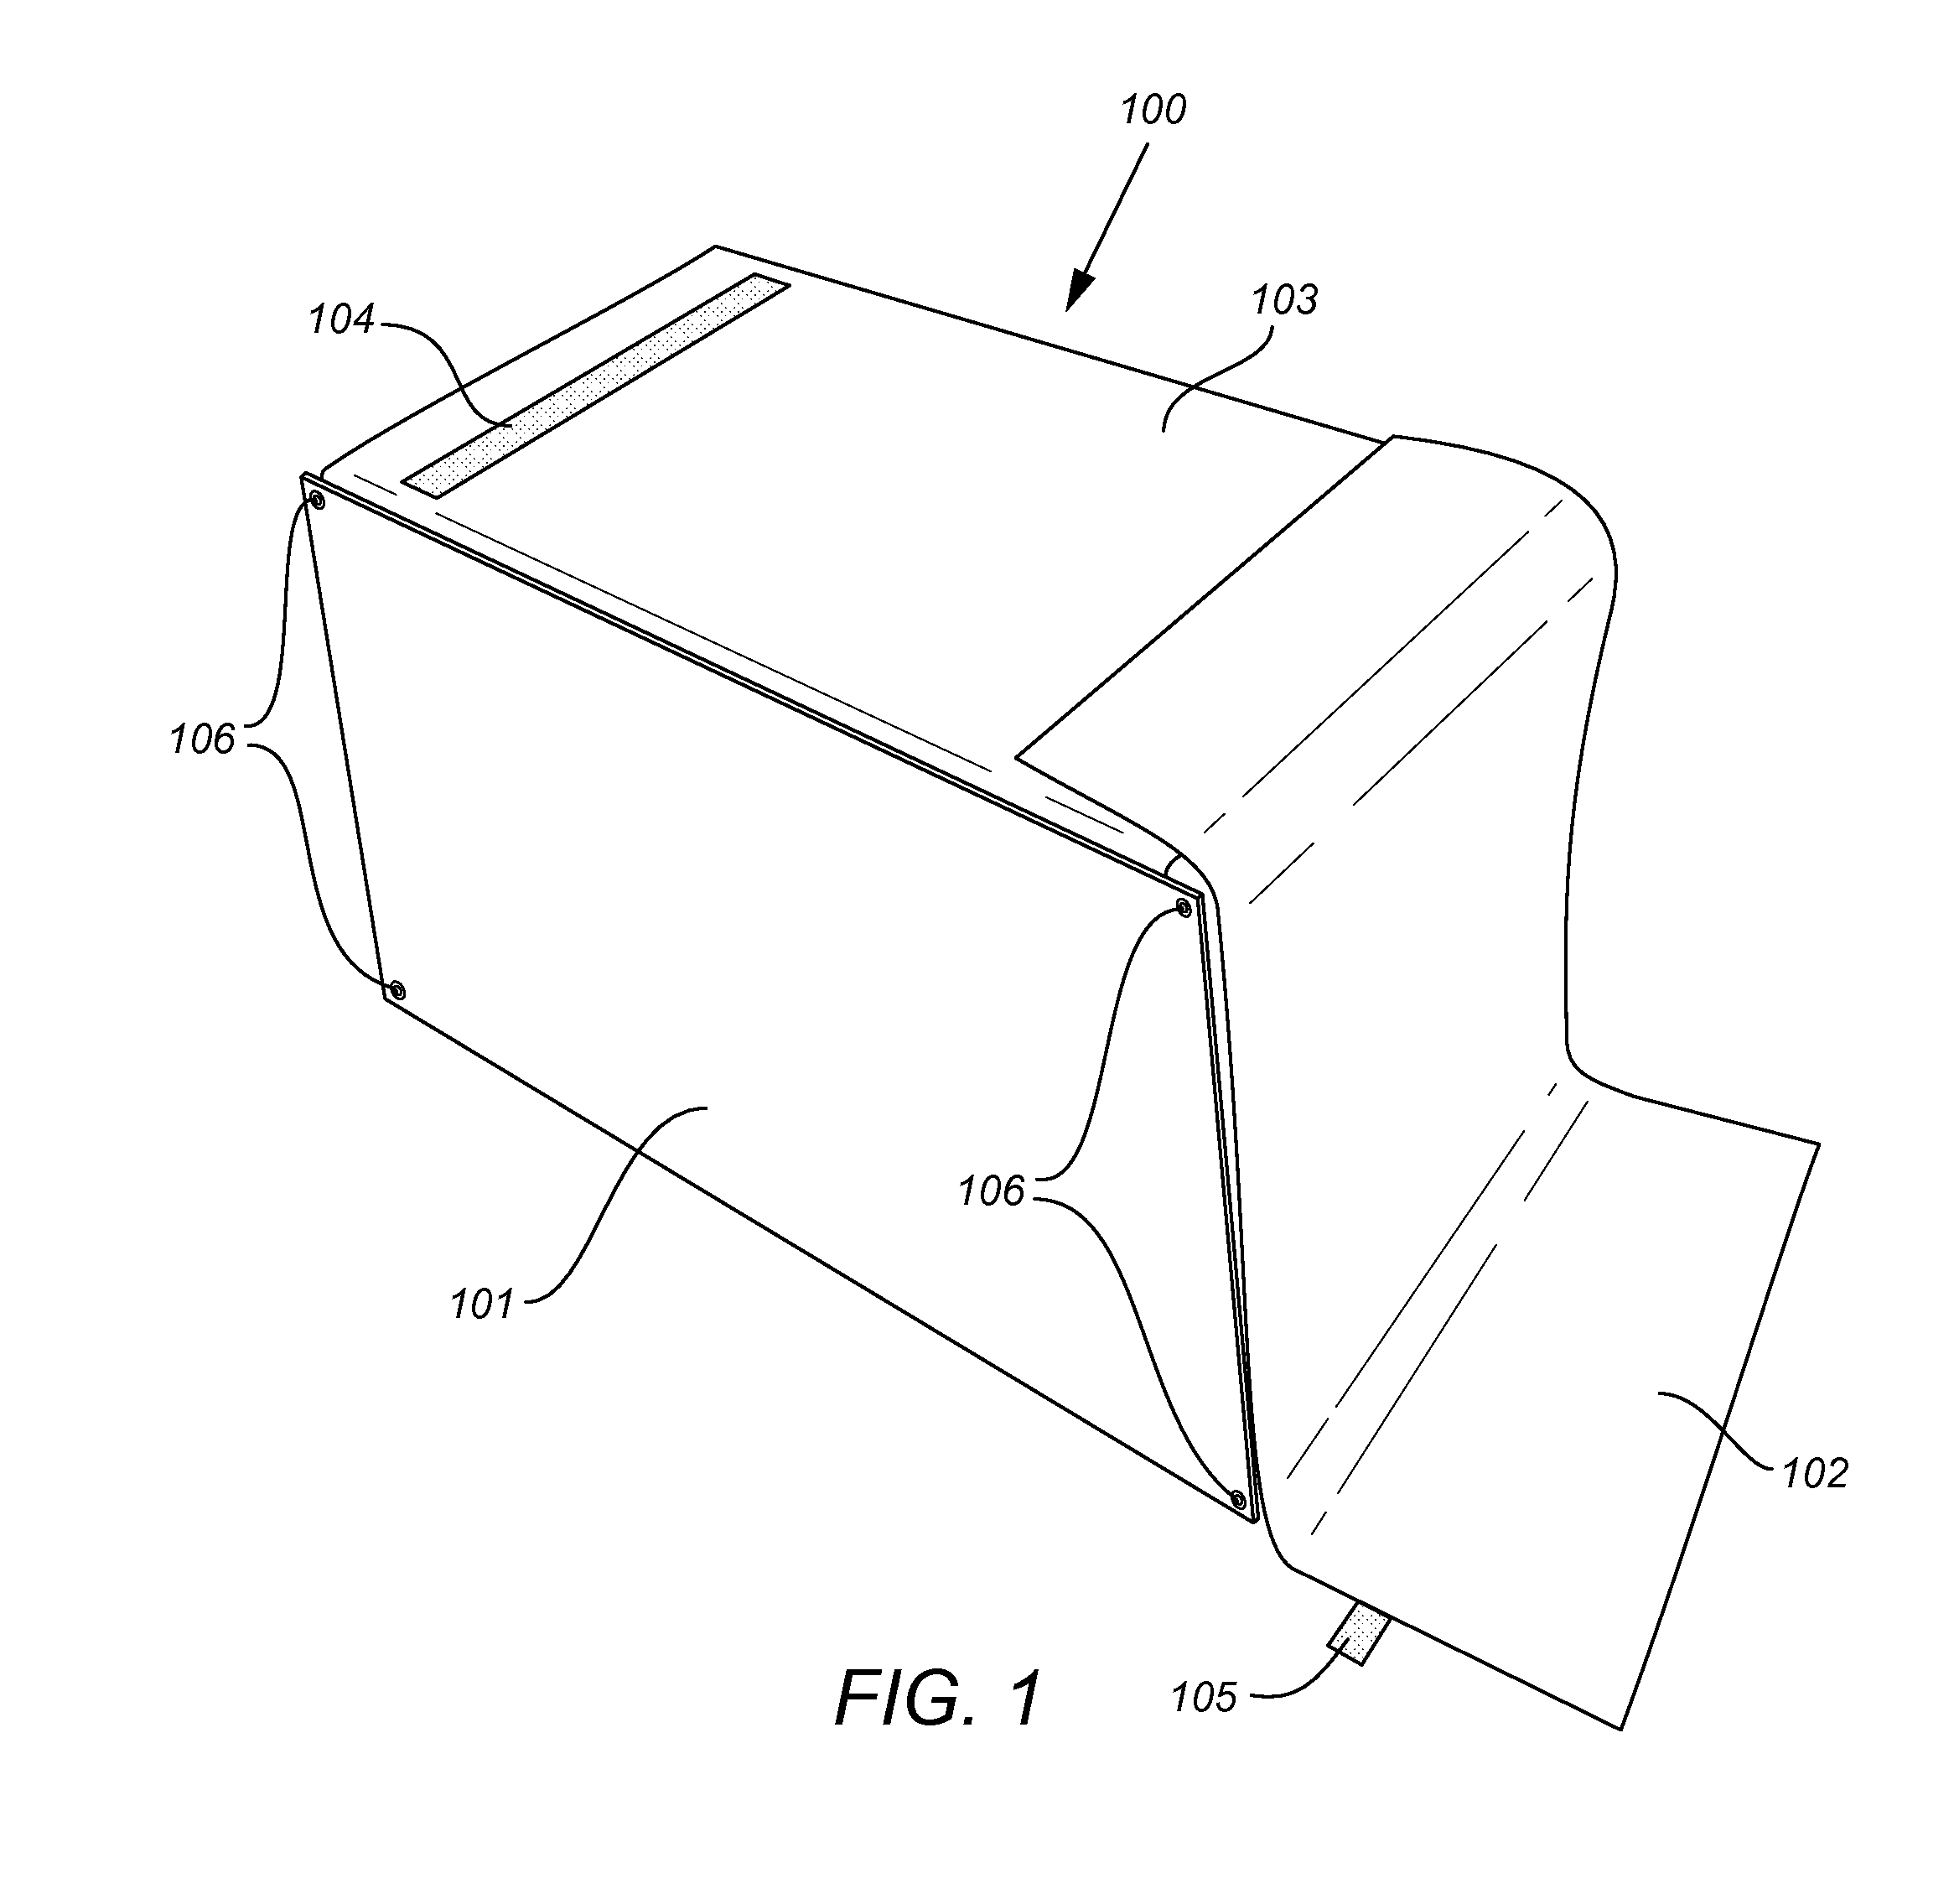 Modular mirror box therapy system for the lower extremity